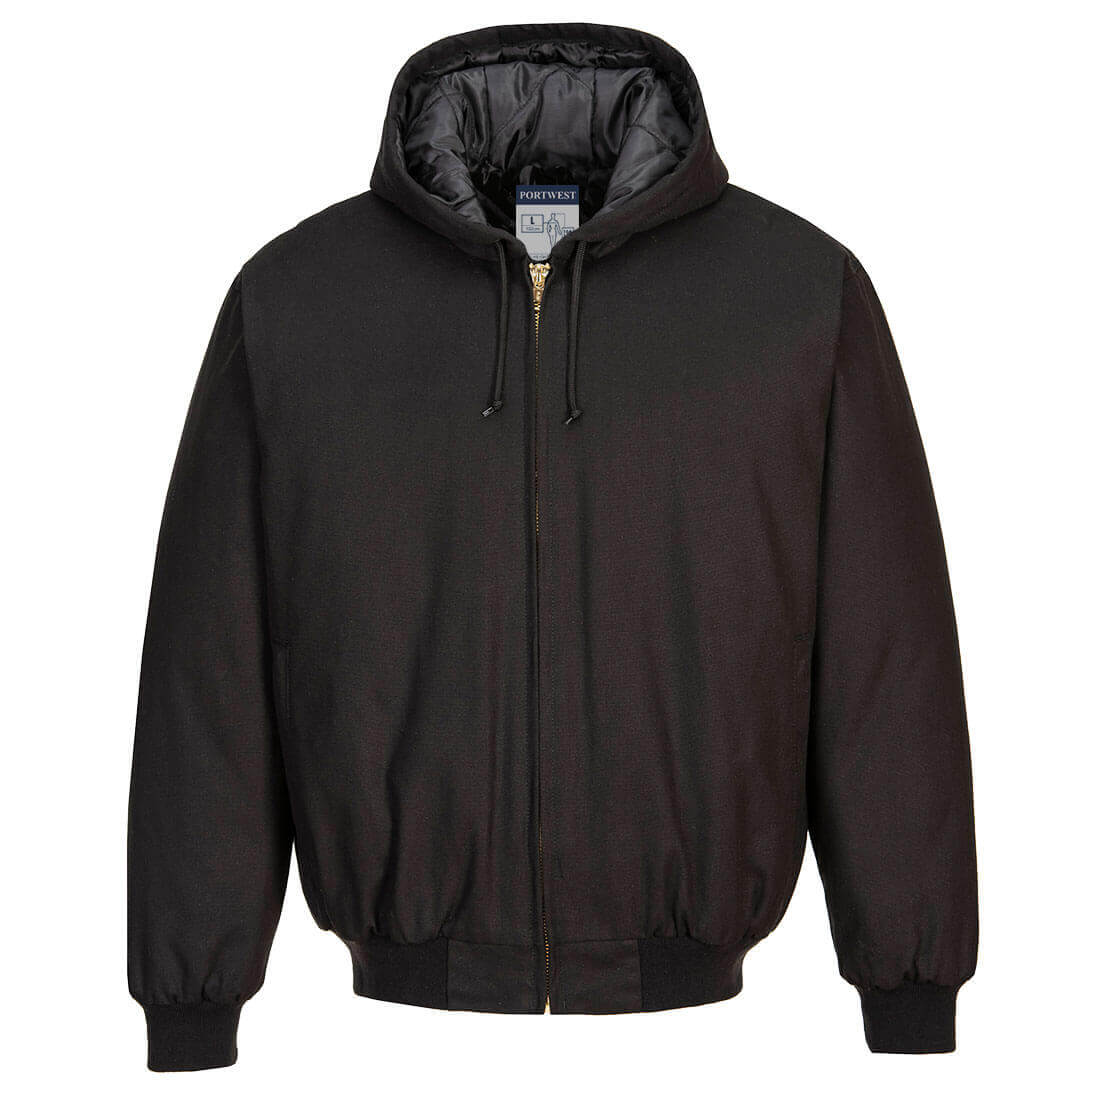 DuraDuck DC801 Portwest Work Quilt Lined Hooded Jacket available at Baremotion